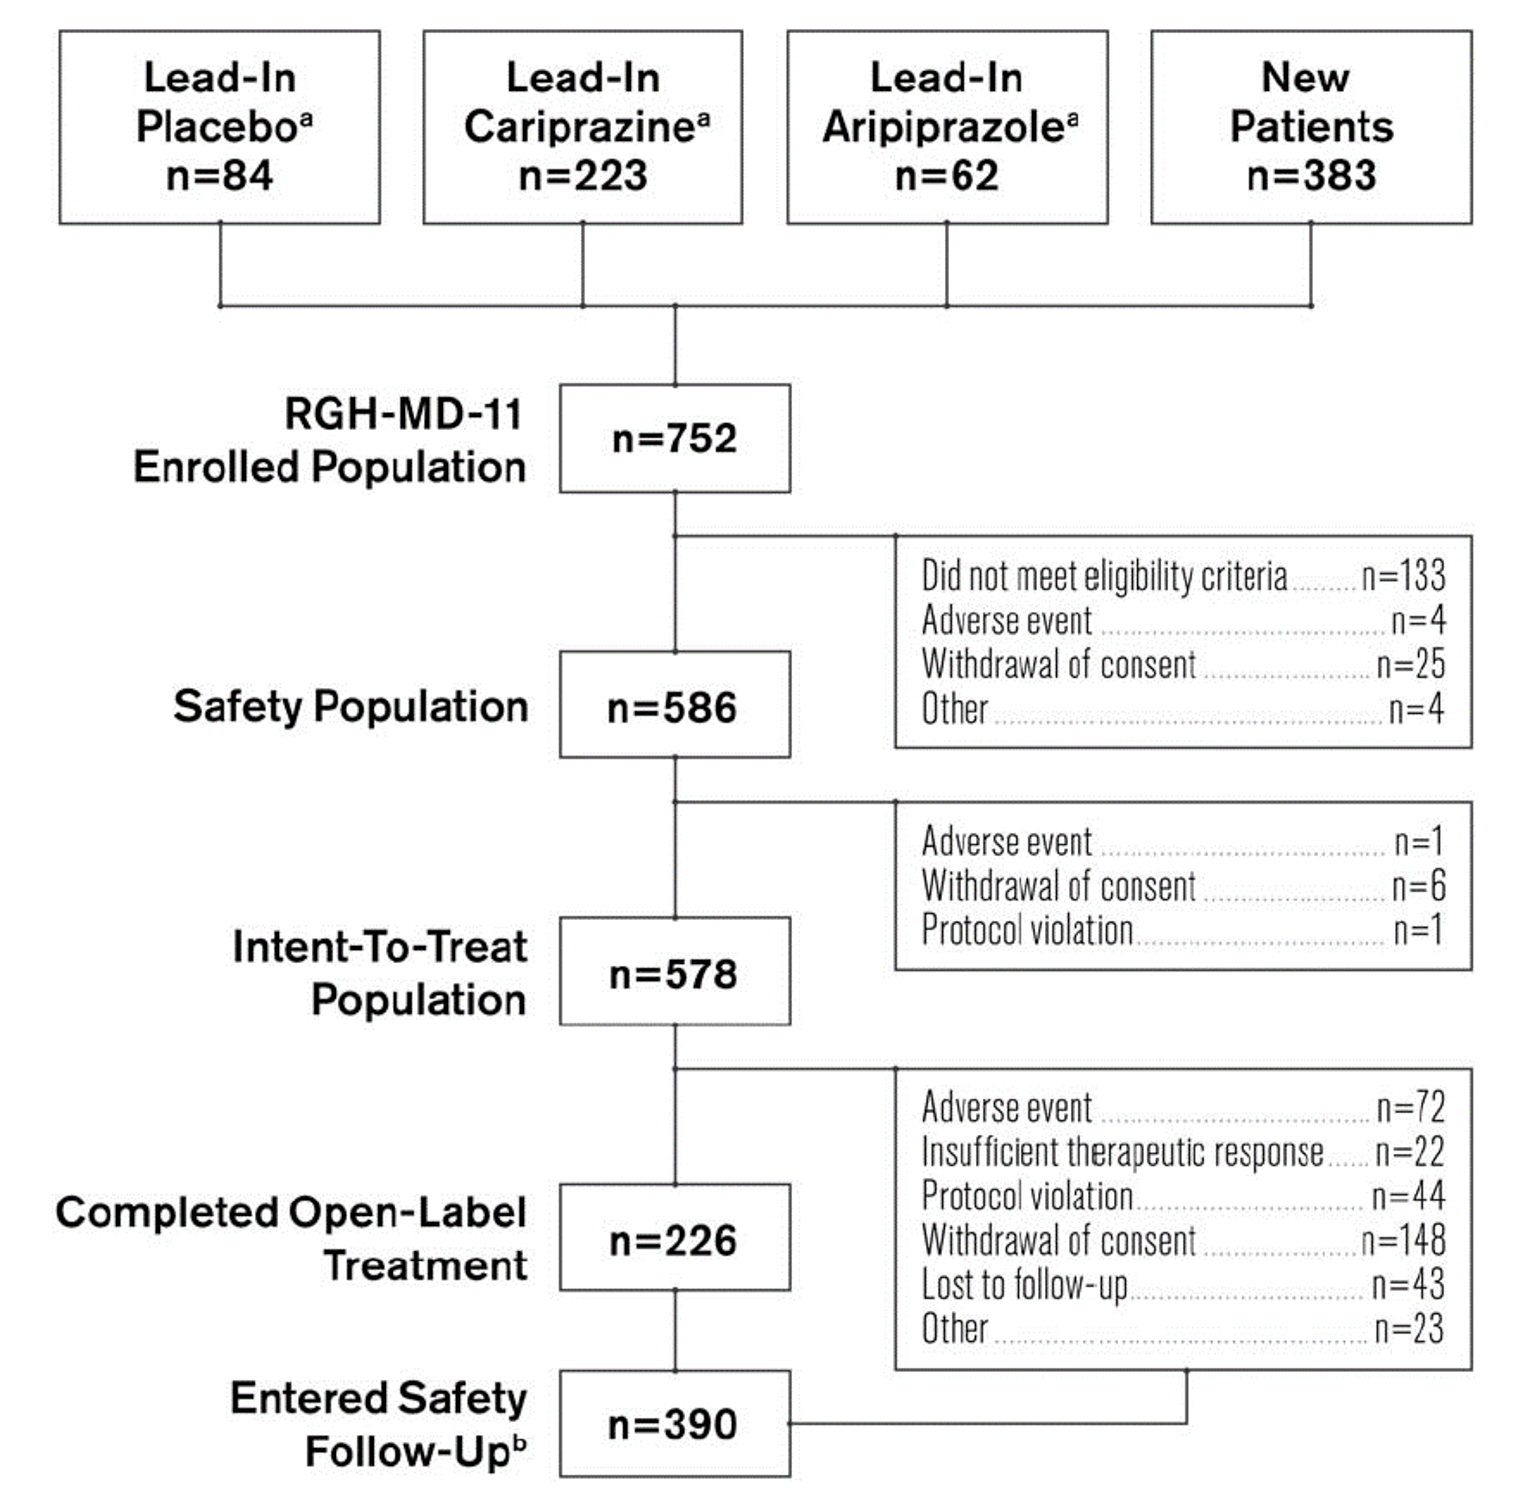 A flow chart showing 752 patients enrolled in Study RGH-MD-11, 586 in the safety population and 578 in the mITT population, 226 completed open-label treatment, and 390 entered safety follow-up. It also presents reasons for discontinuation.